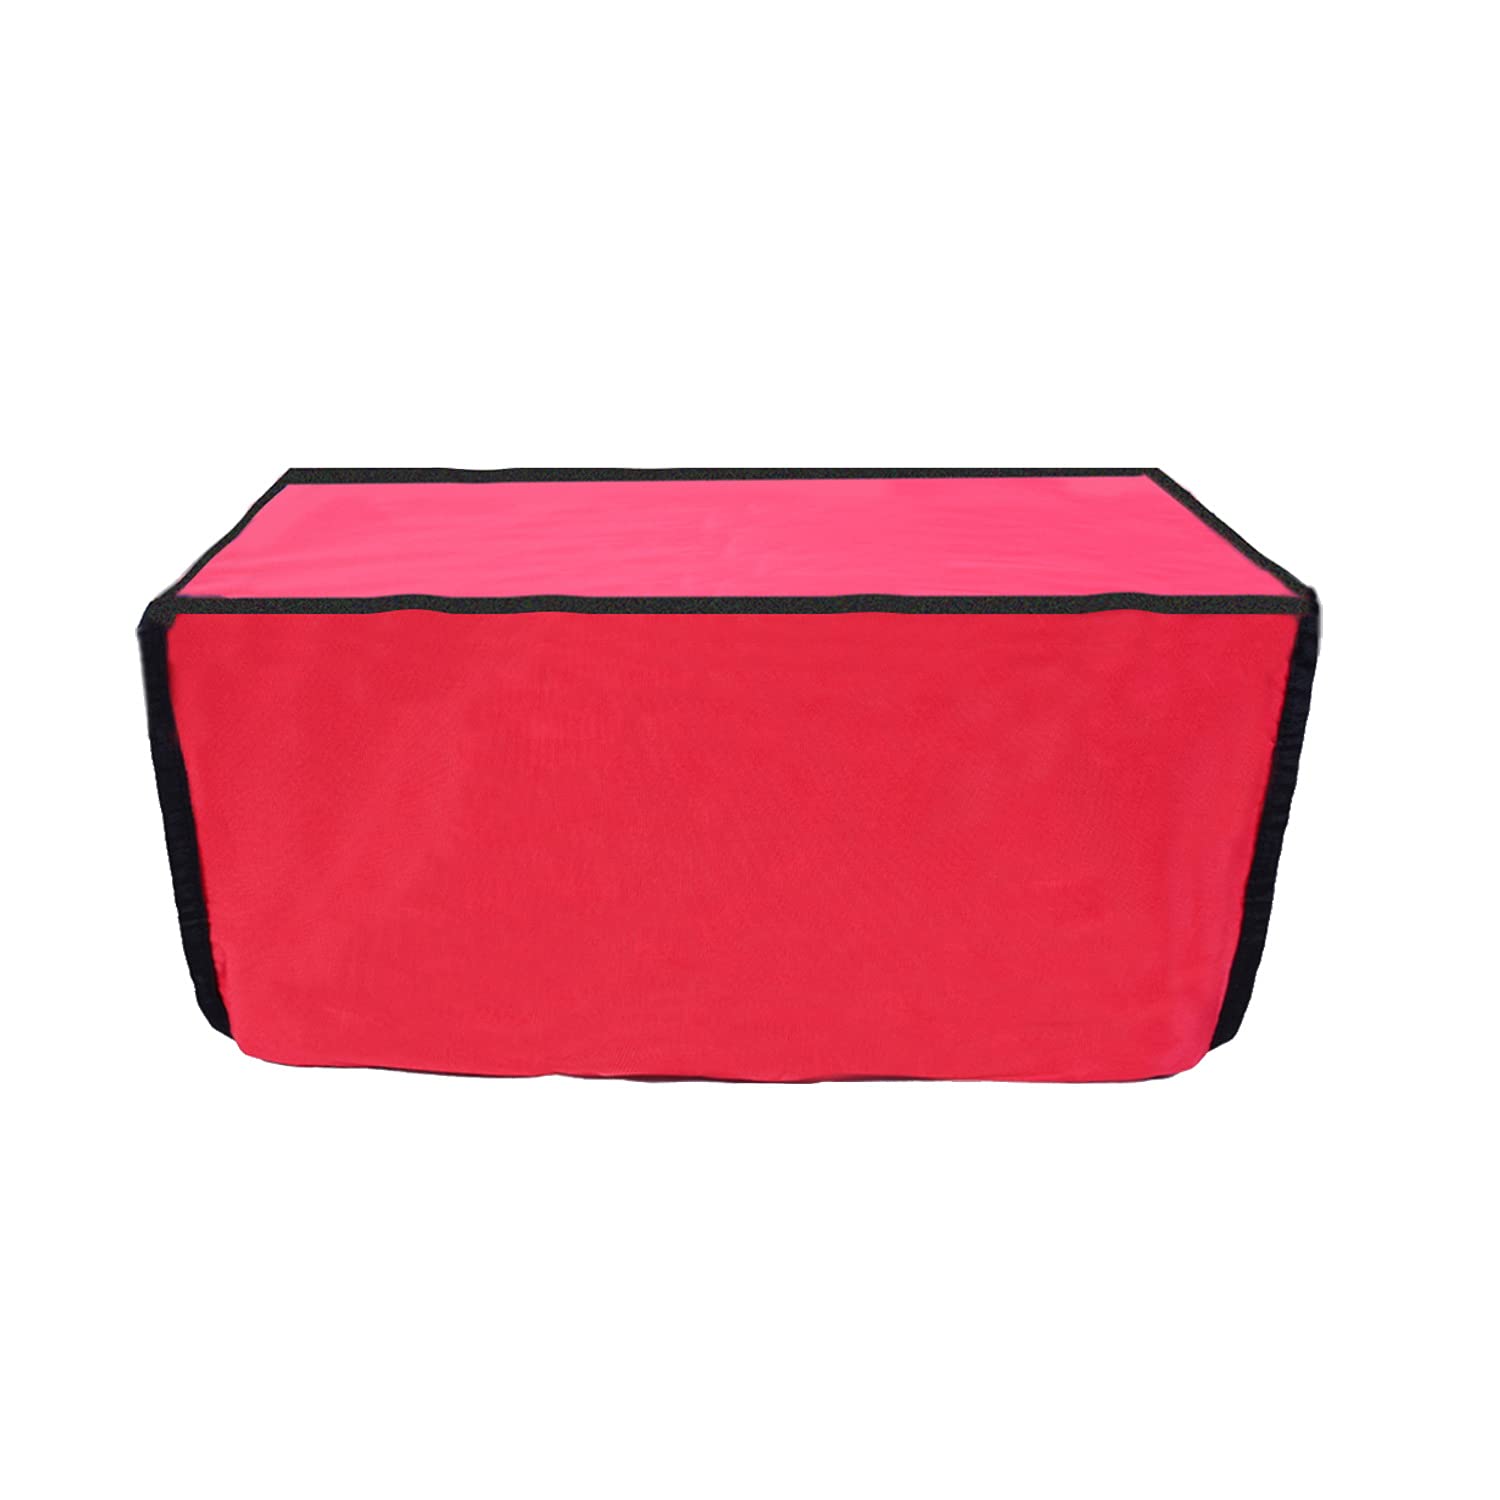 Palap Super Premium Dust Proof Printer Cover for HP 3835 (Red ;50.4 x 41.2 x 27.23 cm)